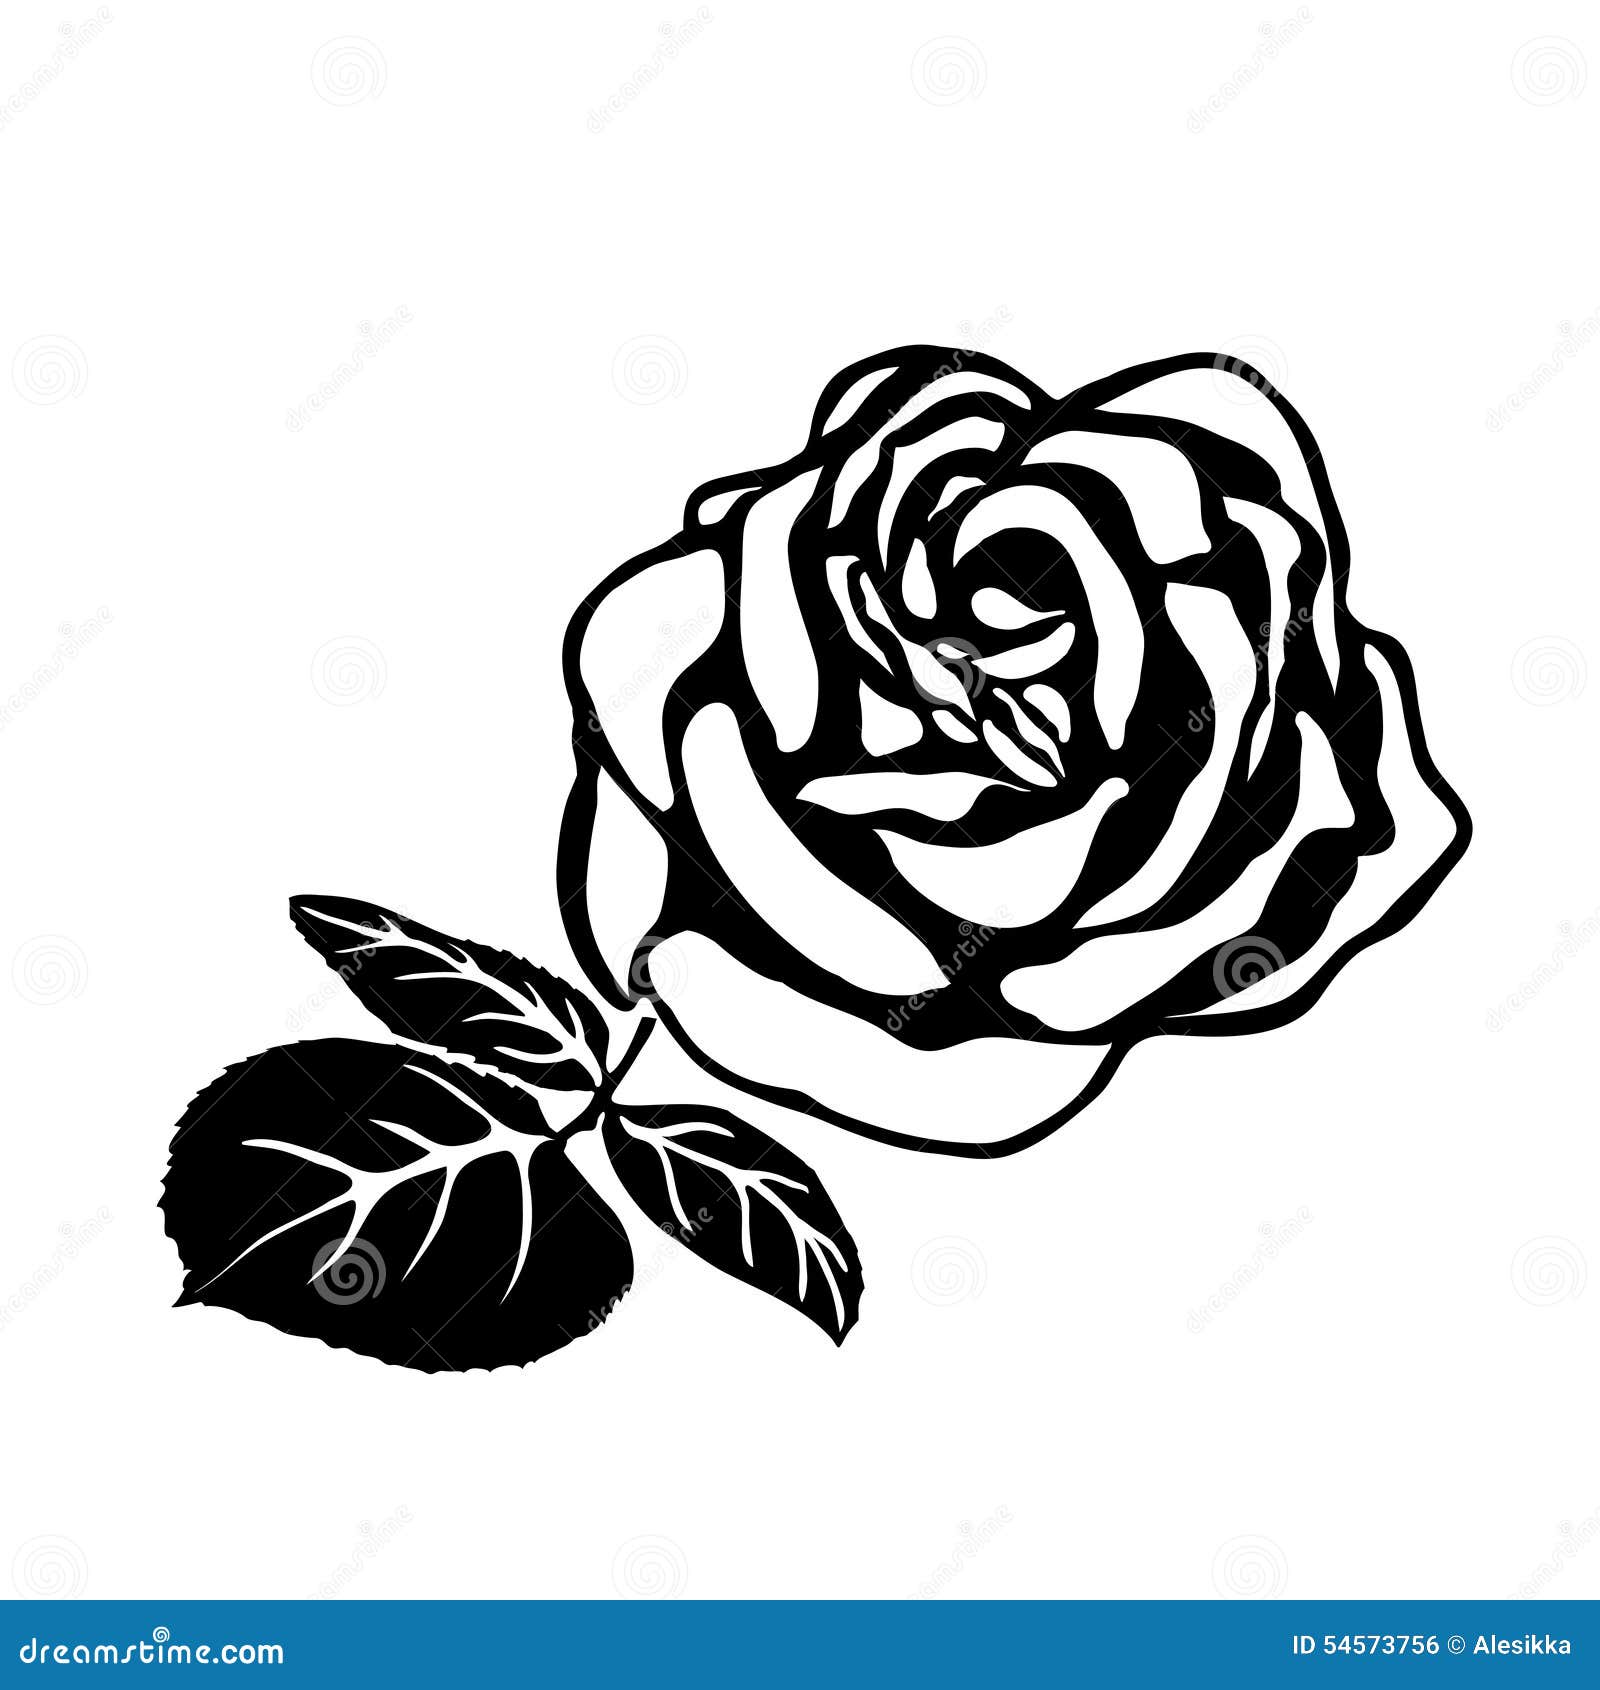 Rose sketch stock vector. Illustration of isolated, drawing - 54573756